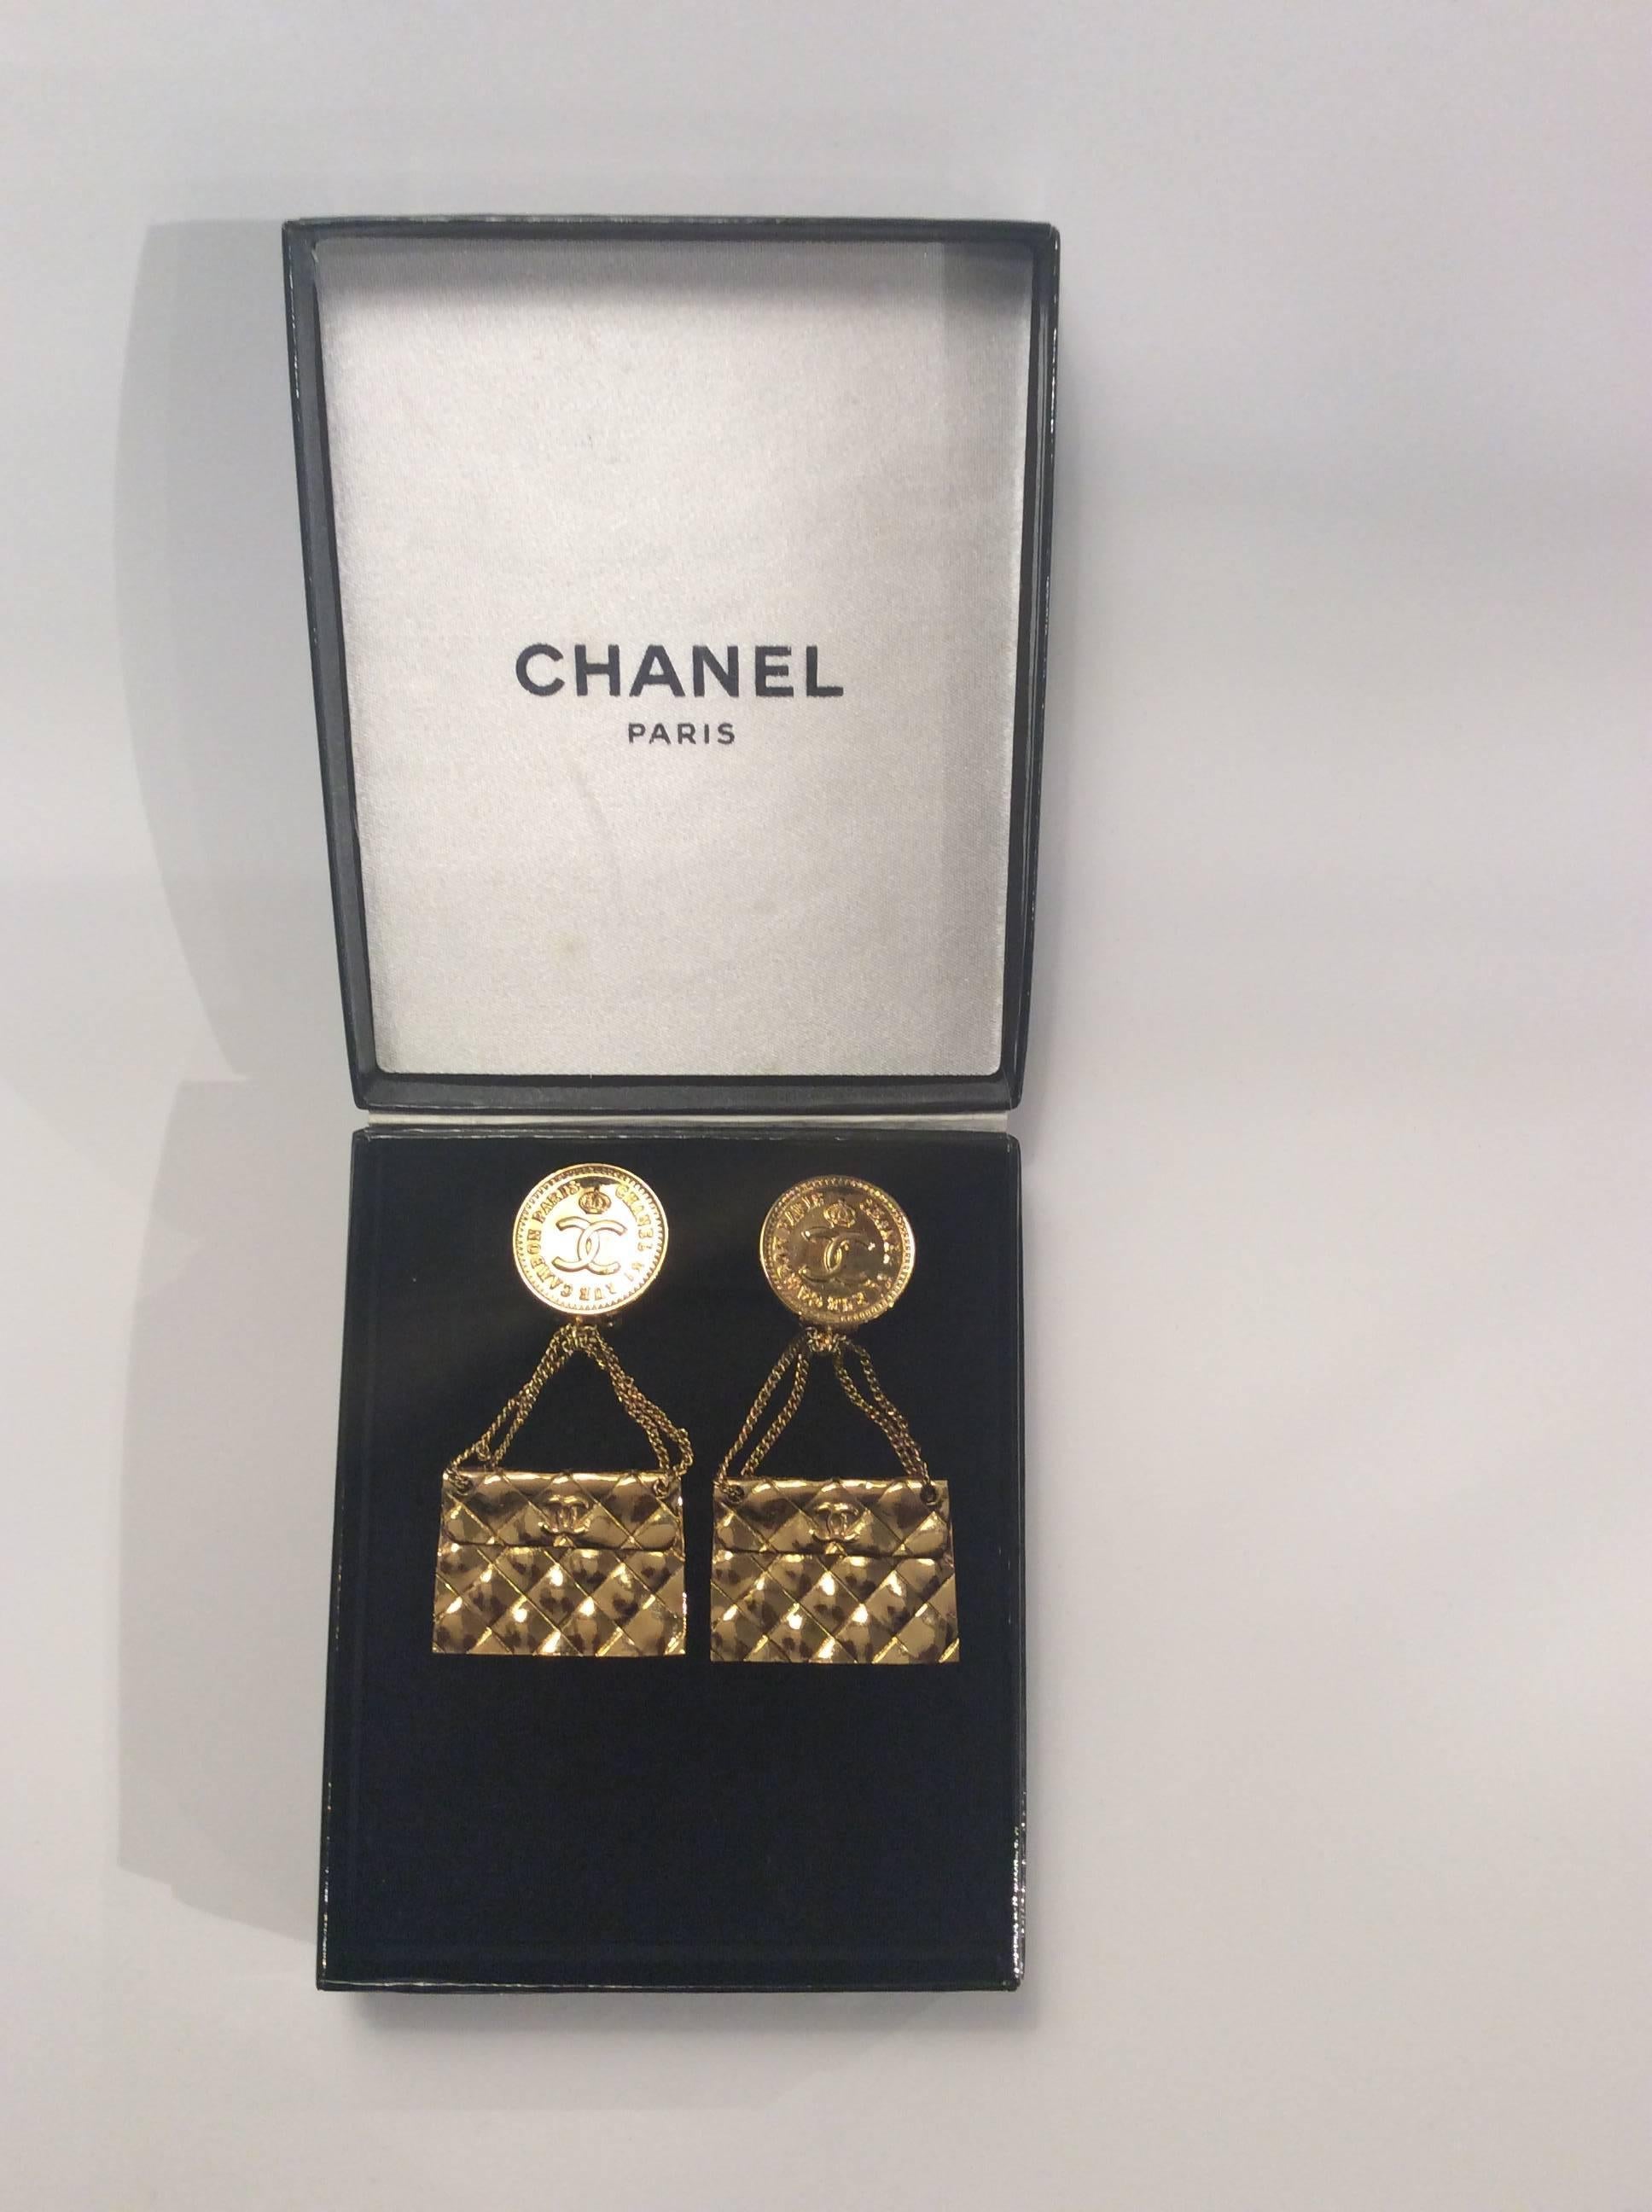 Iconic 1989 Chanel gold clip on earrings.

Comes with the original box